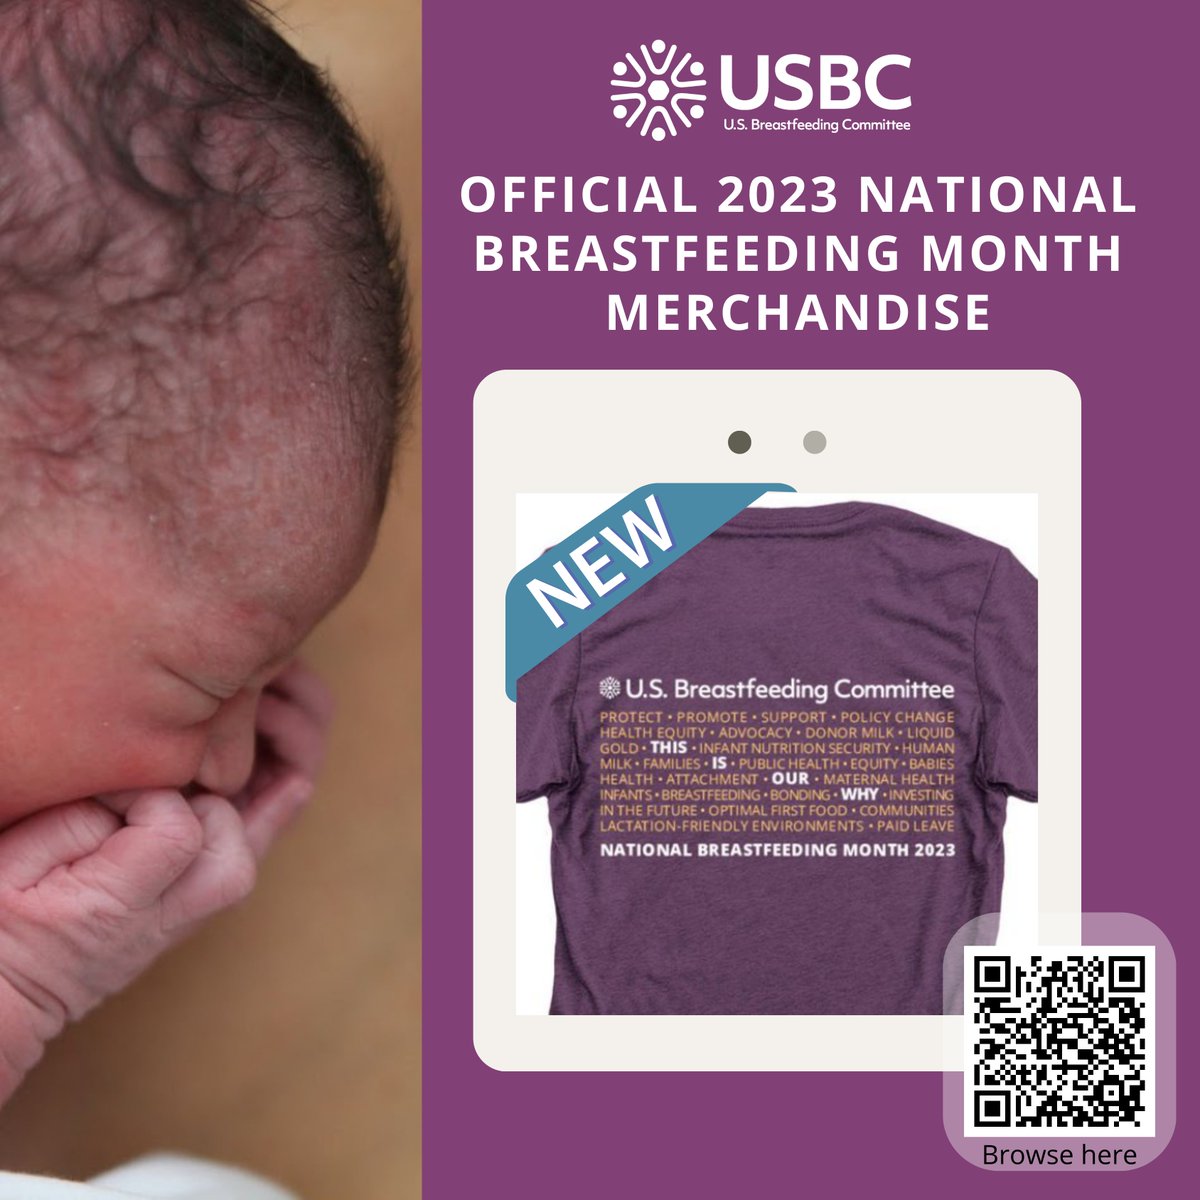 Have you purchased your #NationalBreastfeedingMonth t-shirt? Browse the official limited edition t-shirts here: bit.ly/44S7ha1 #NBM23 #ThisIsOurWhy